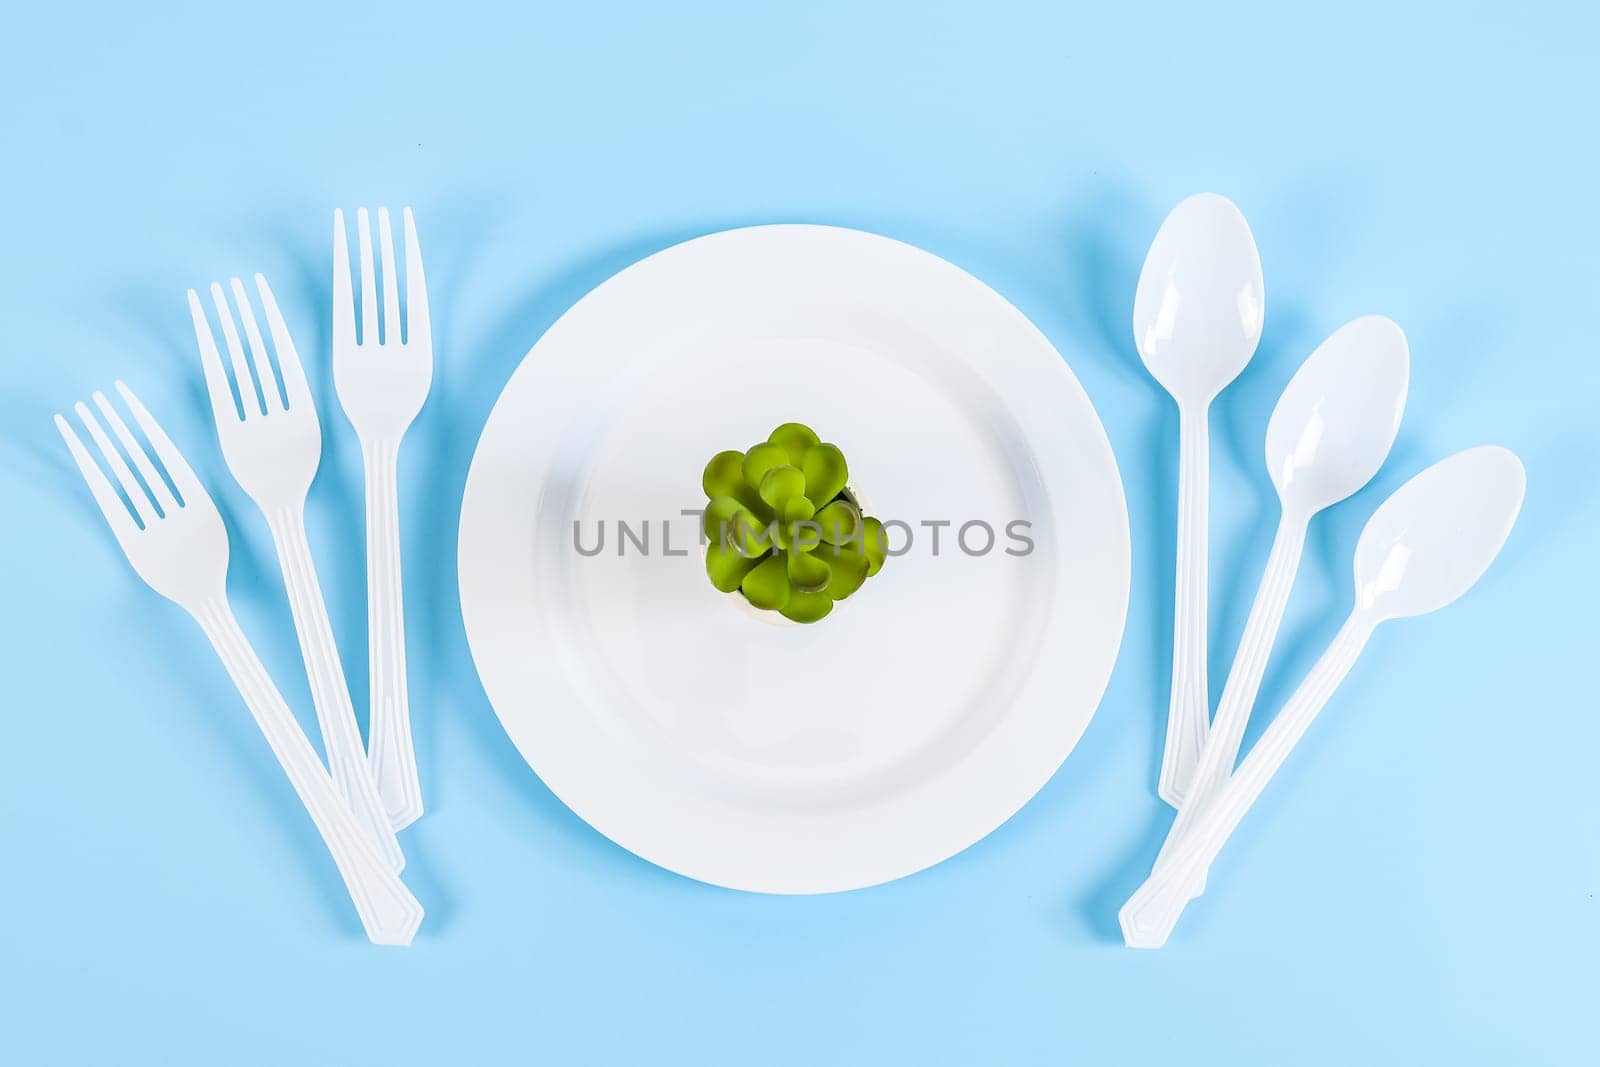 A succulent flower in a plastic white plate, three disposable forks and three spoons lie on a pastel blue background, flat lay close-up.